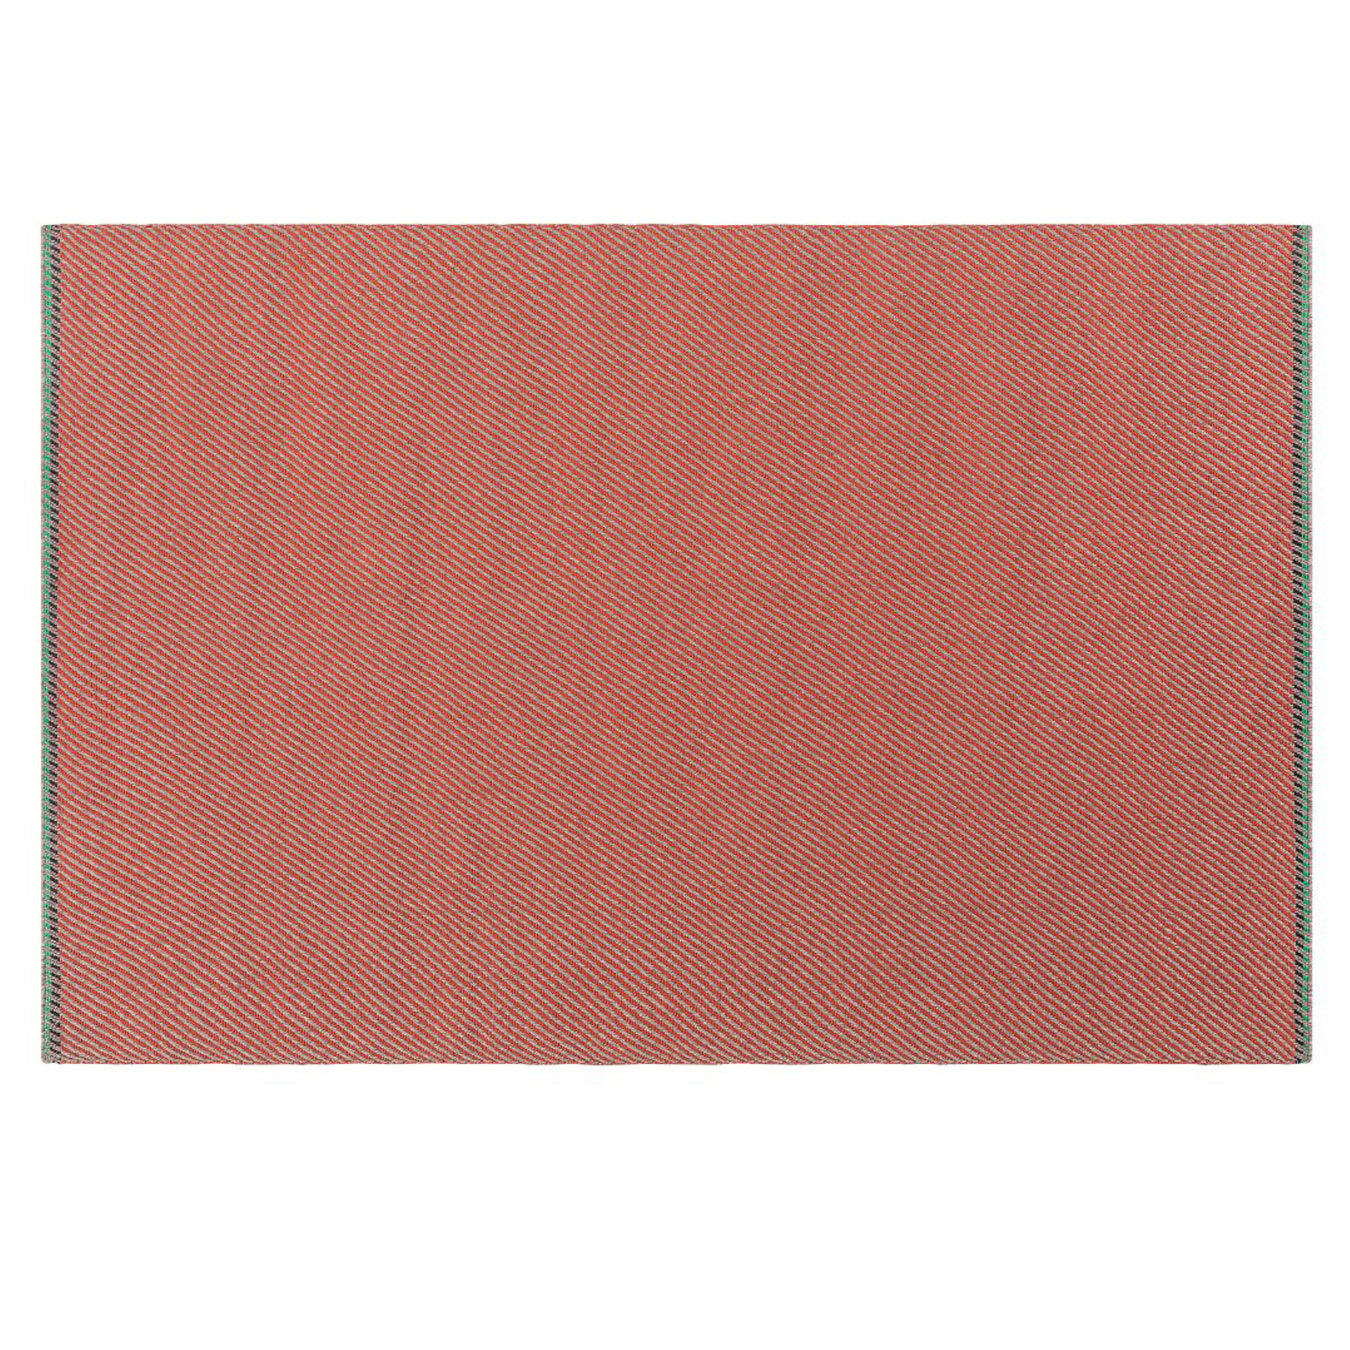 Haworth Diagonales Rug in red color with green trim